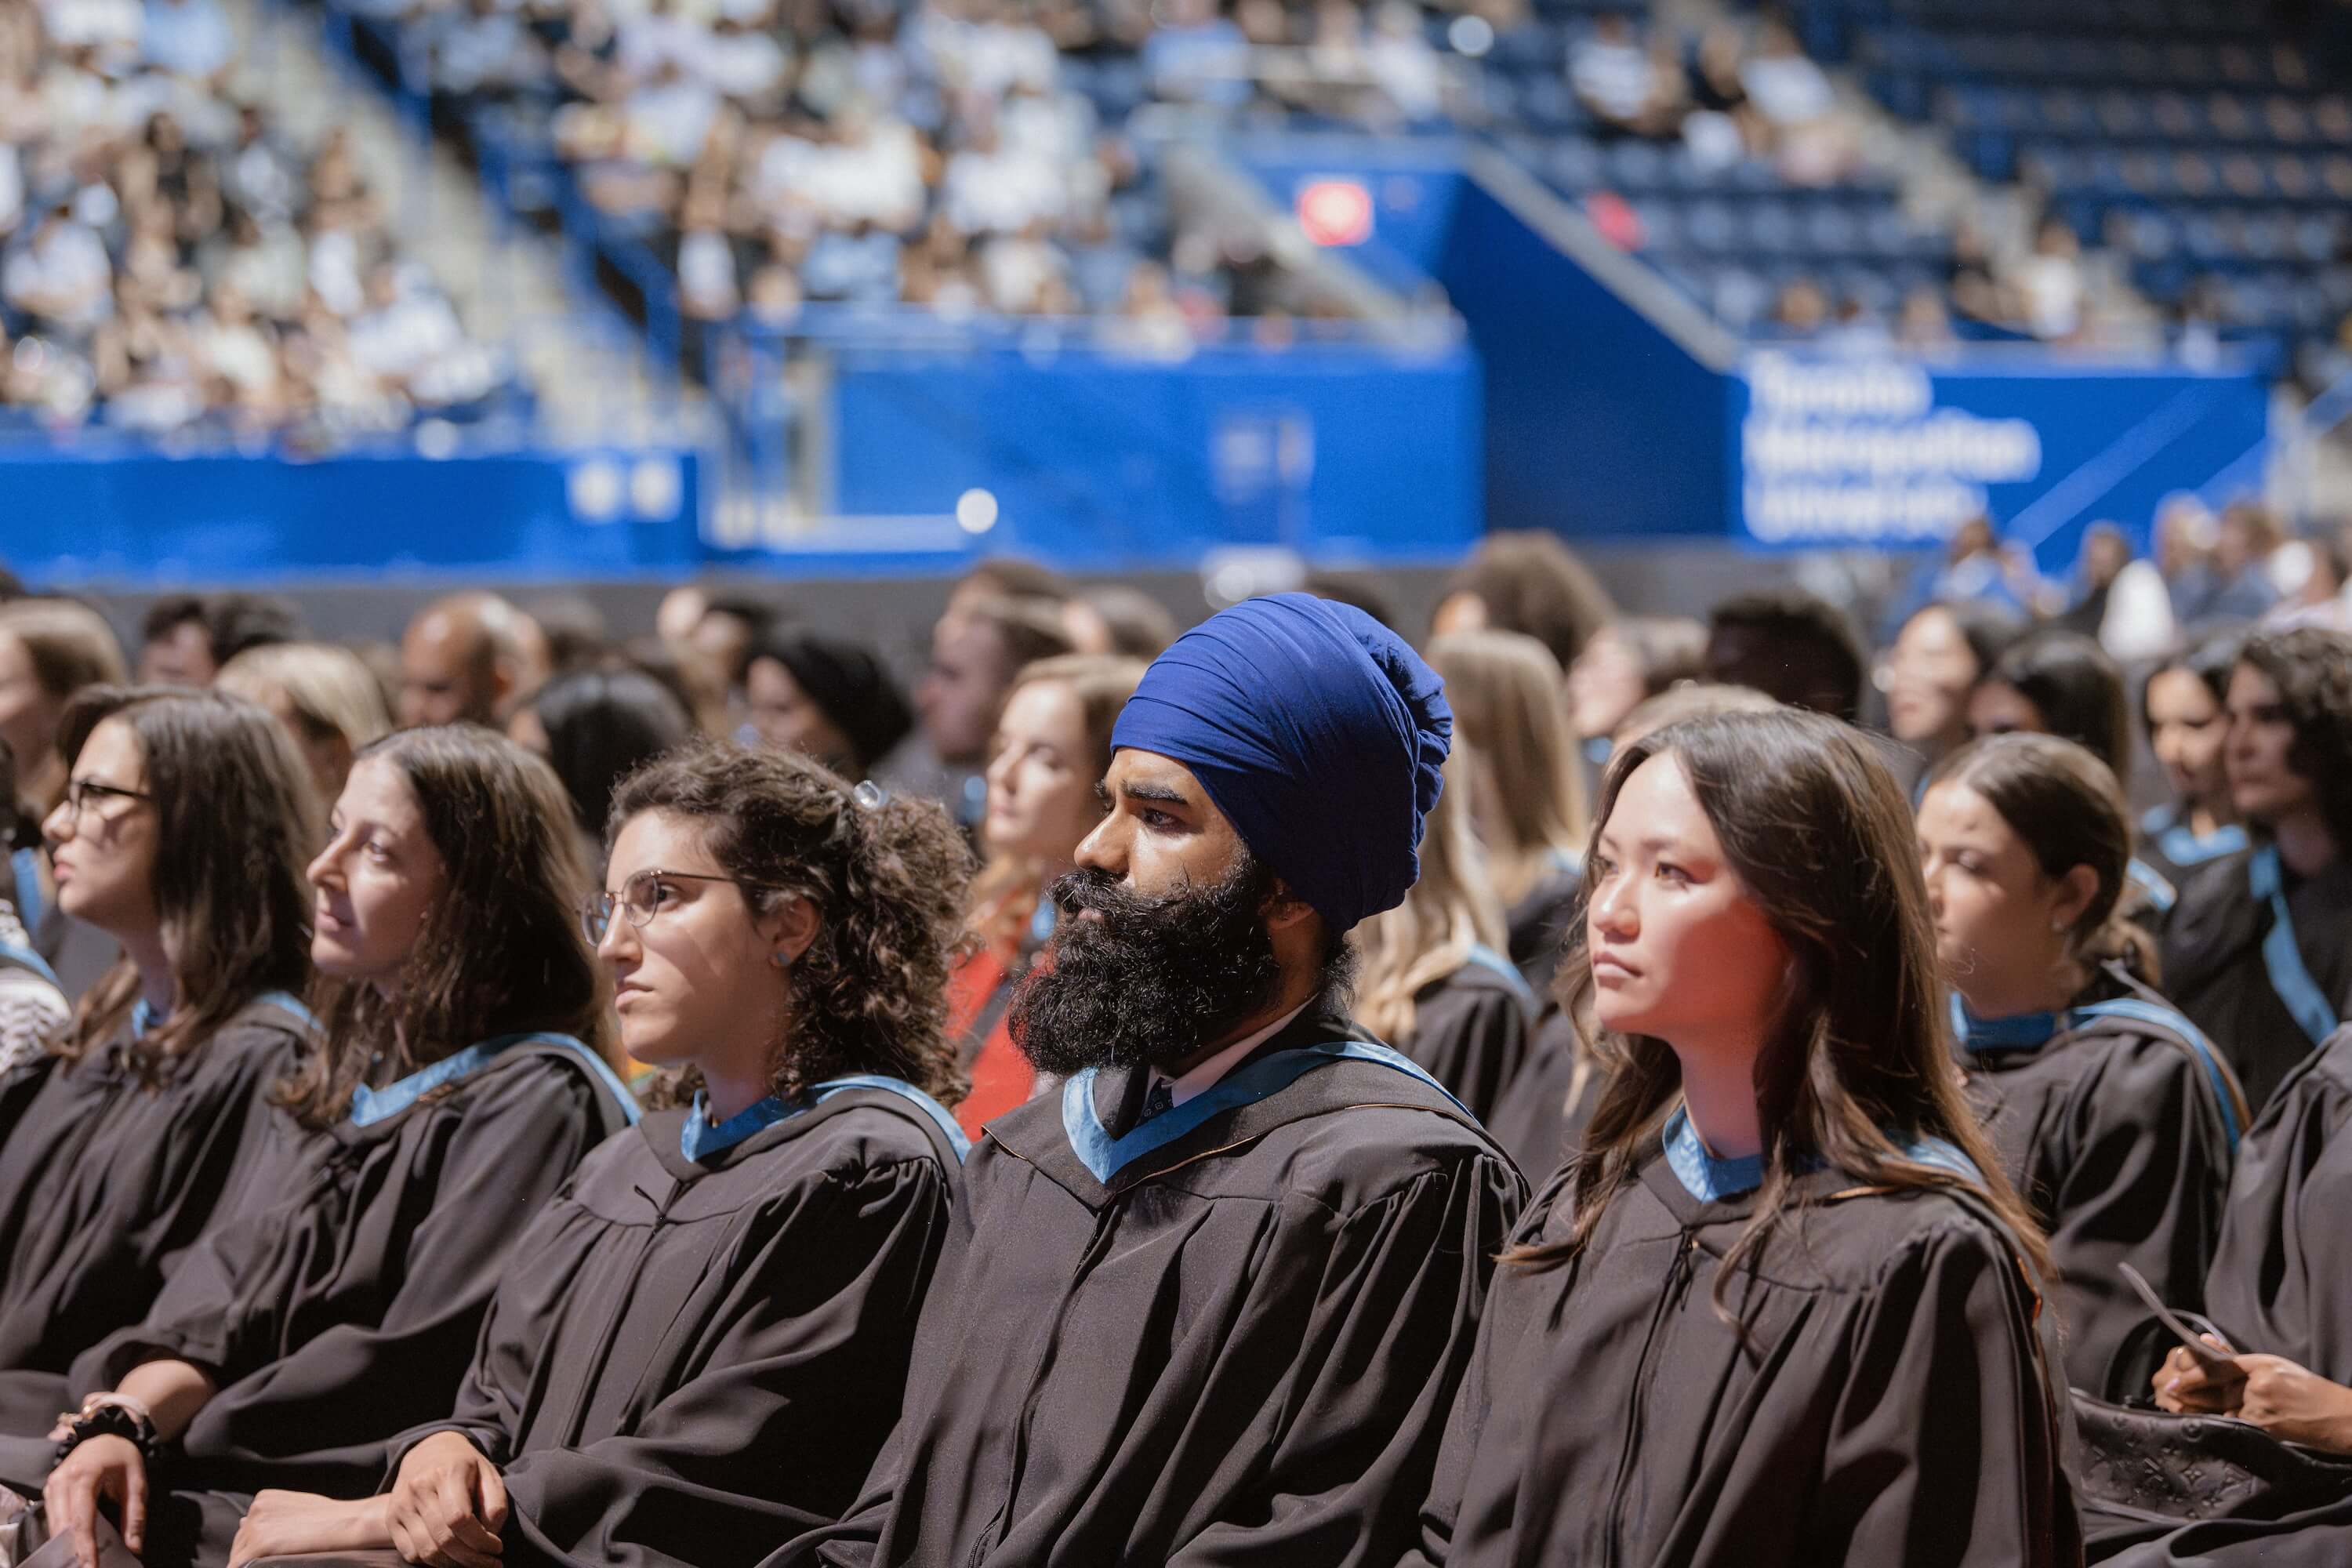 Graduates sitting in the audience at Convocation.